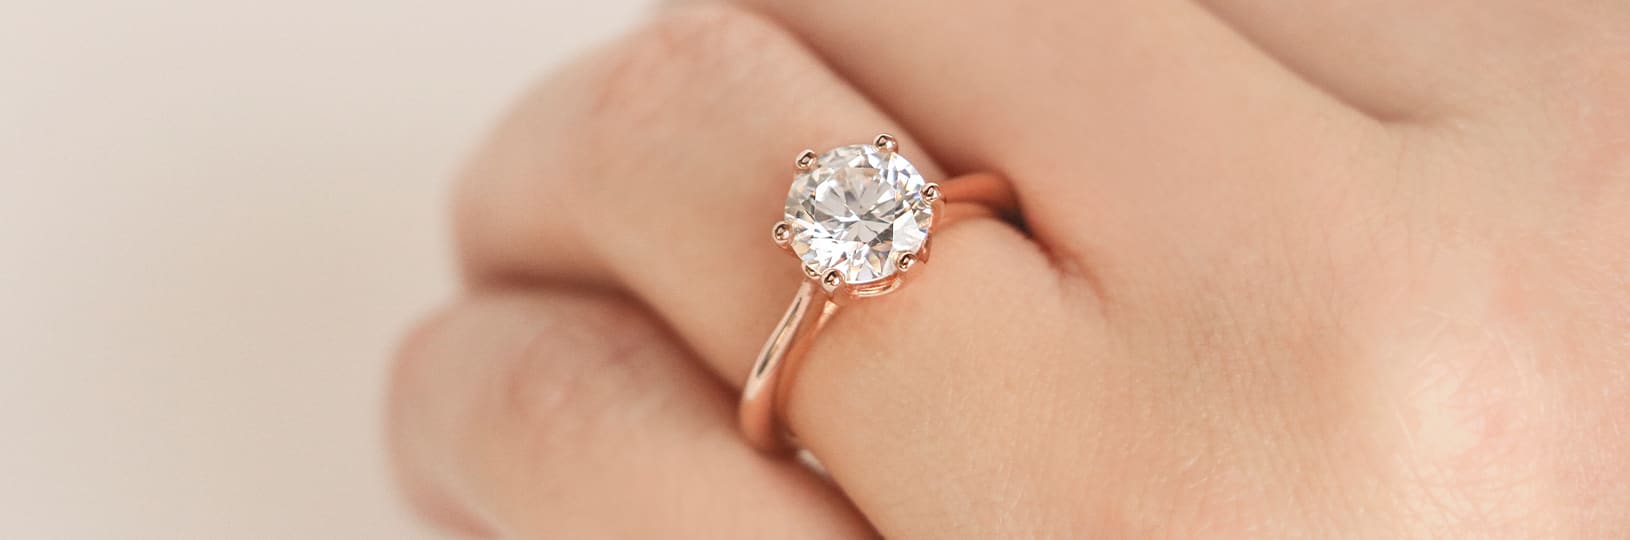 A solitaire lab created diamond simulant engagement ring.